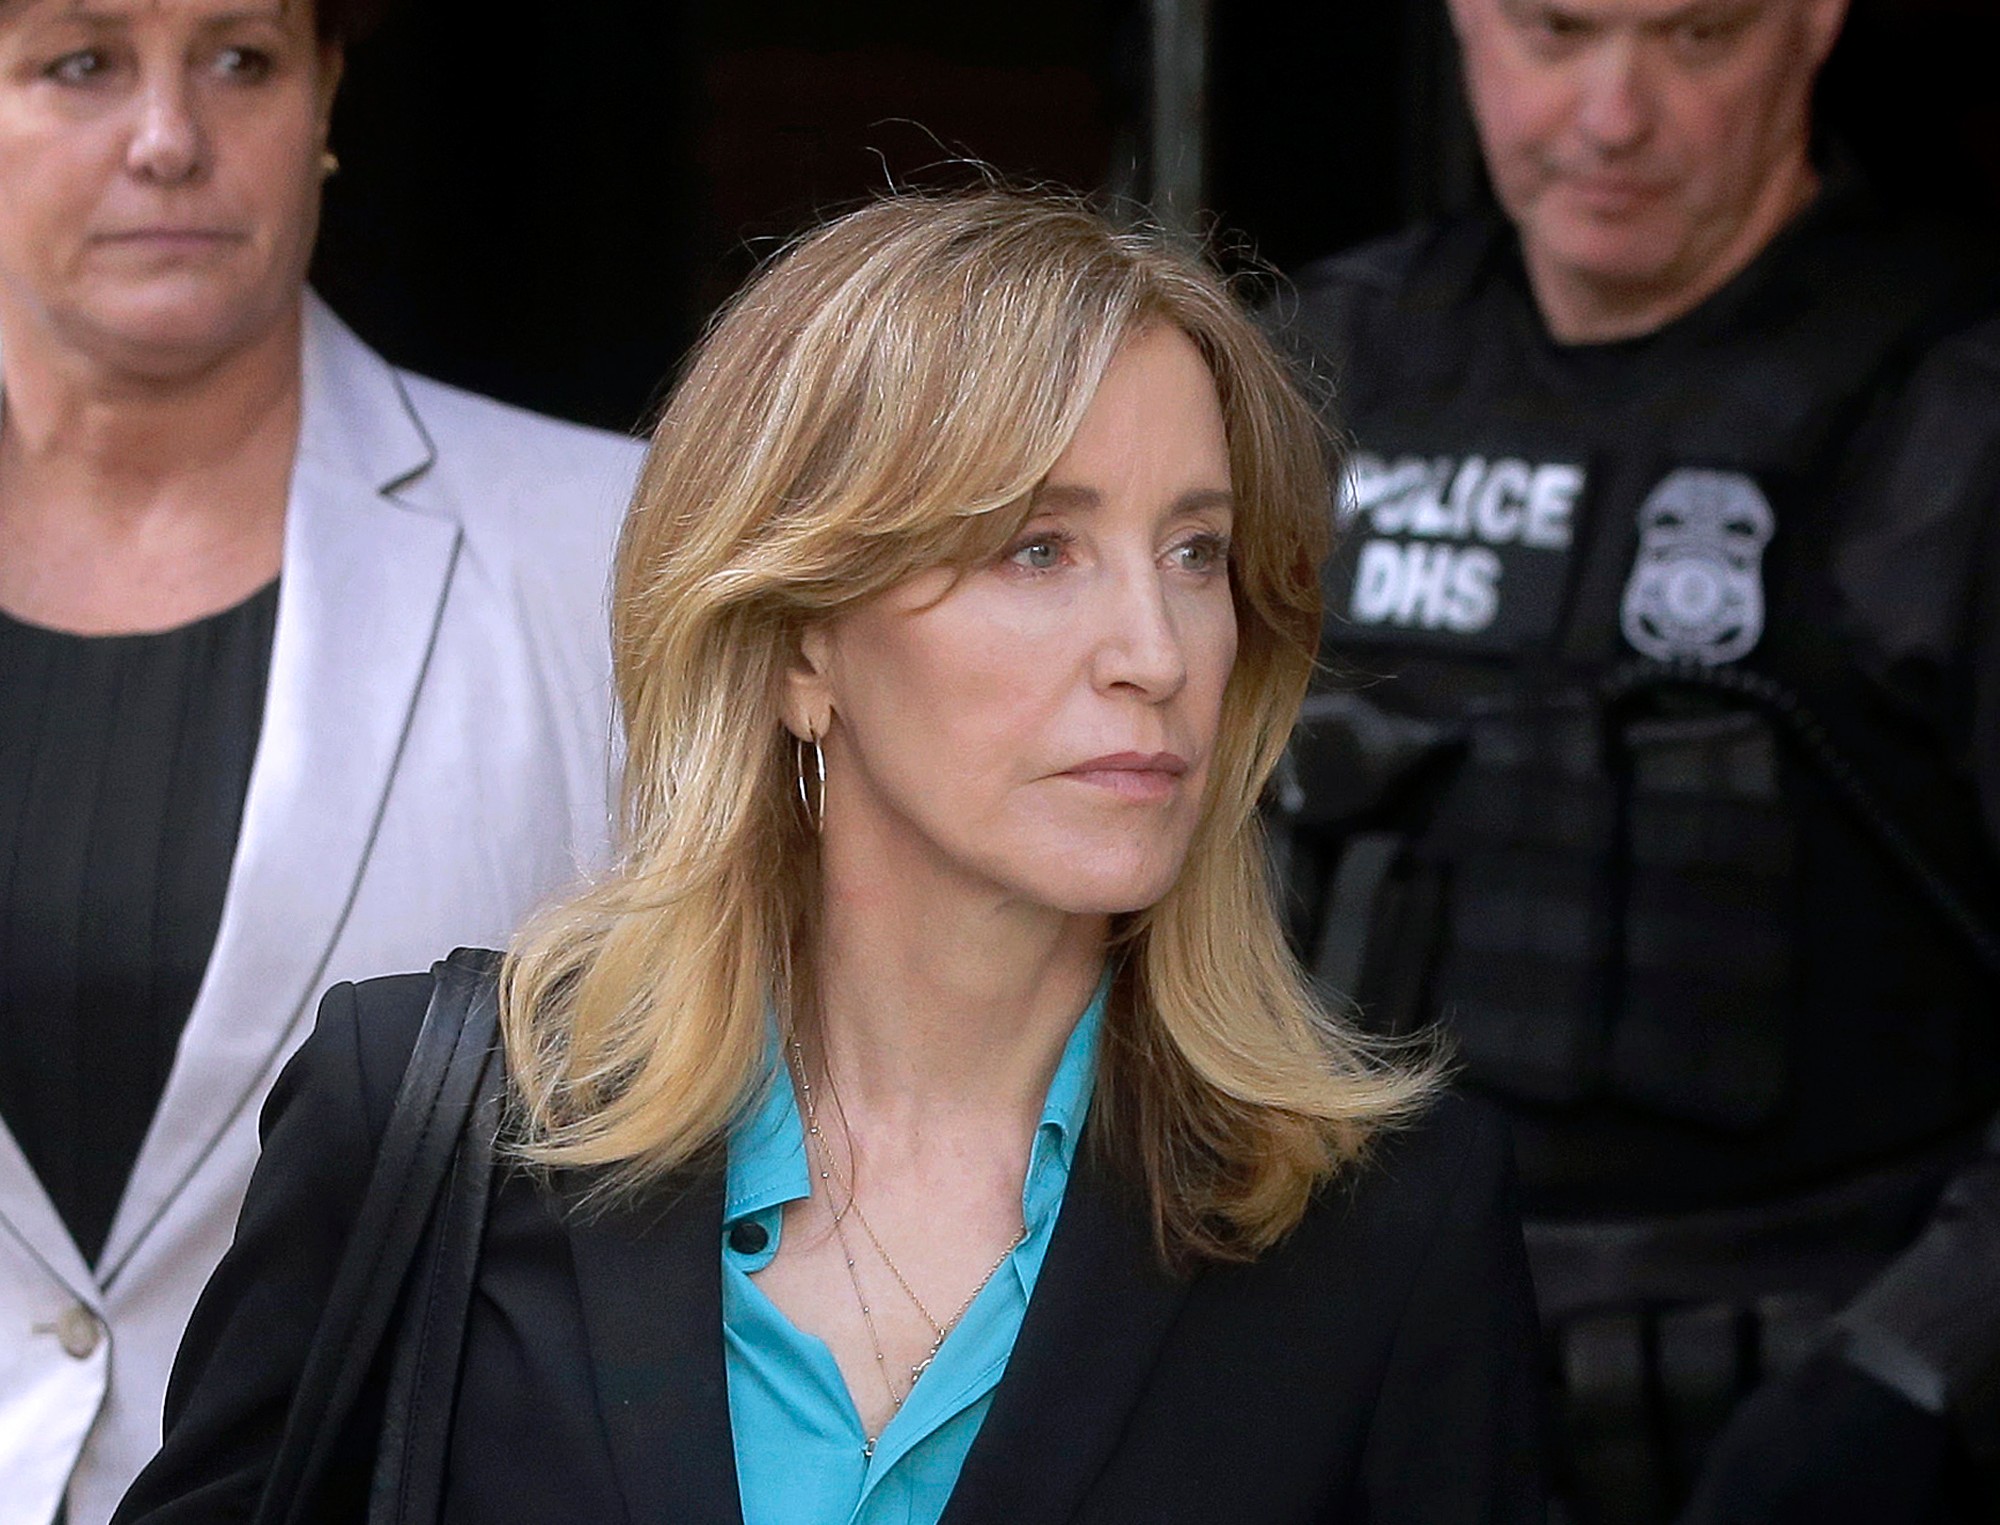 Felicity Huffman And 13 Others Plead Guilty In College Admissions Scandal Vice News